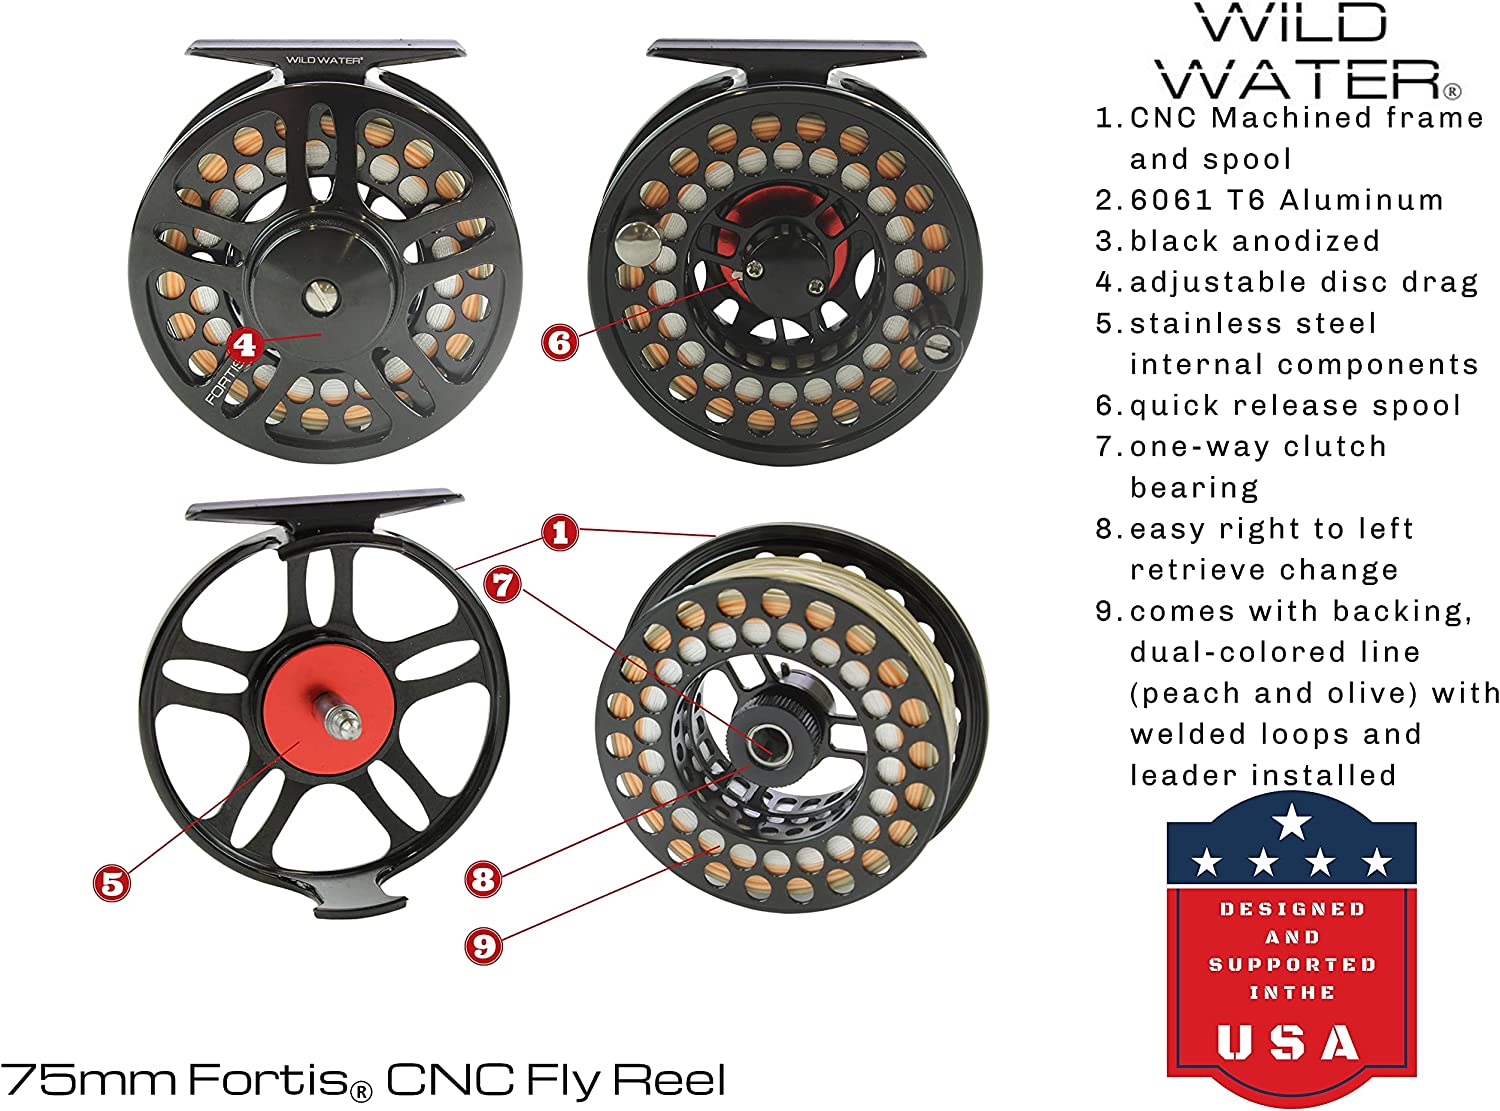 Wild Water CNC Fly Reel Fly Fishing Combo, 9ft 3/4 wt